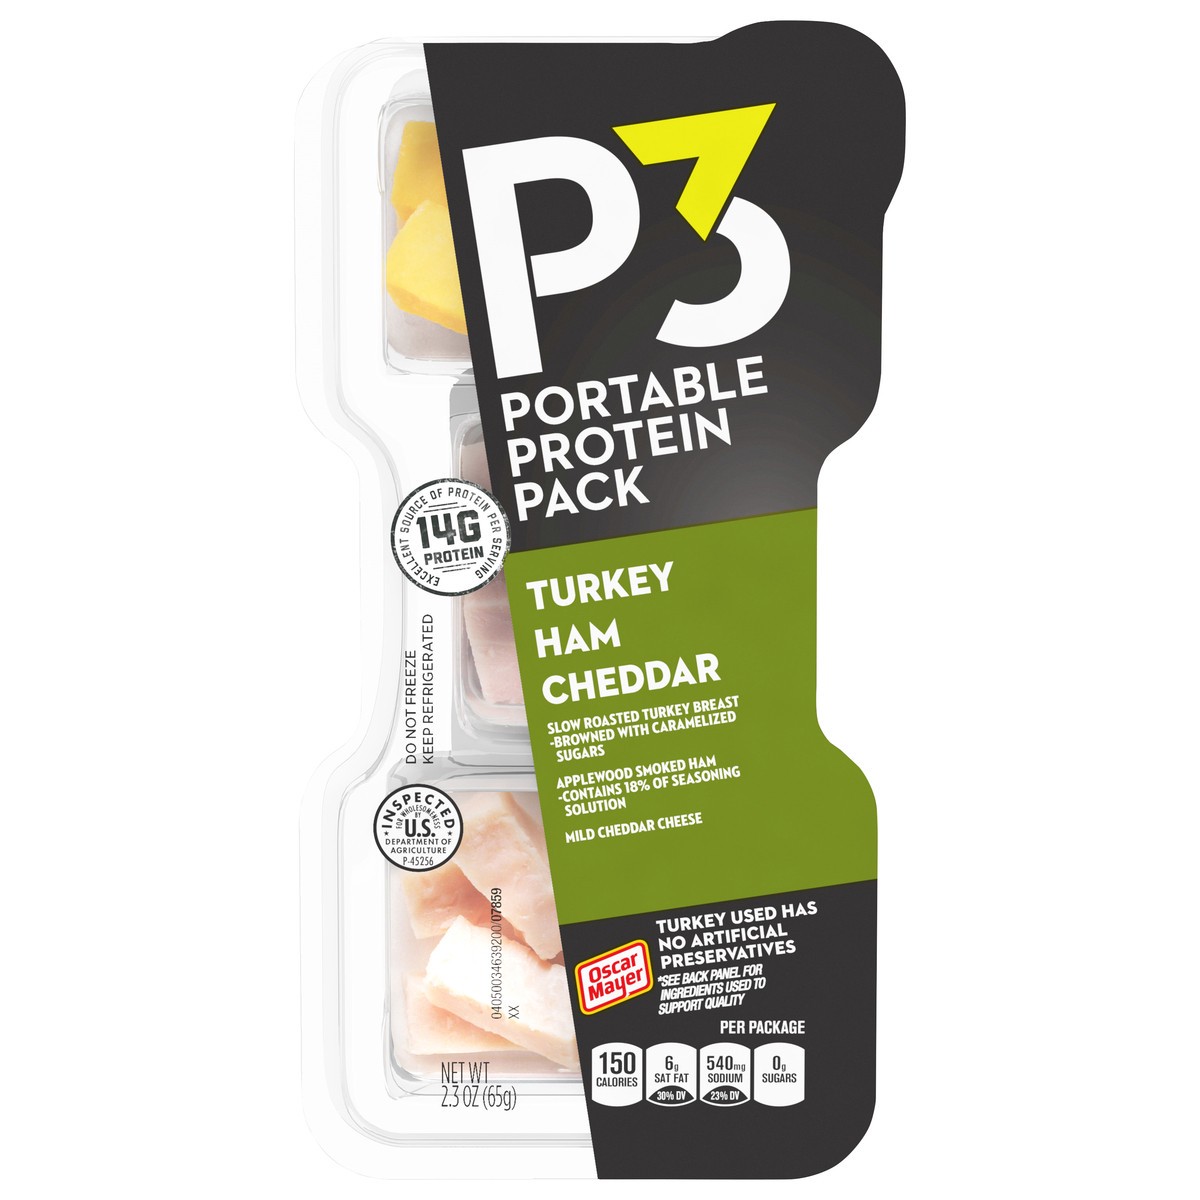 slide 1 of 5, P3 Portable Protein Snack Pack with Turkey, Ham & Cheddar Cheese, 2.3 oz Tray, 2.3 oz